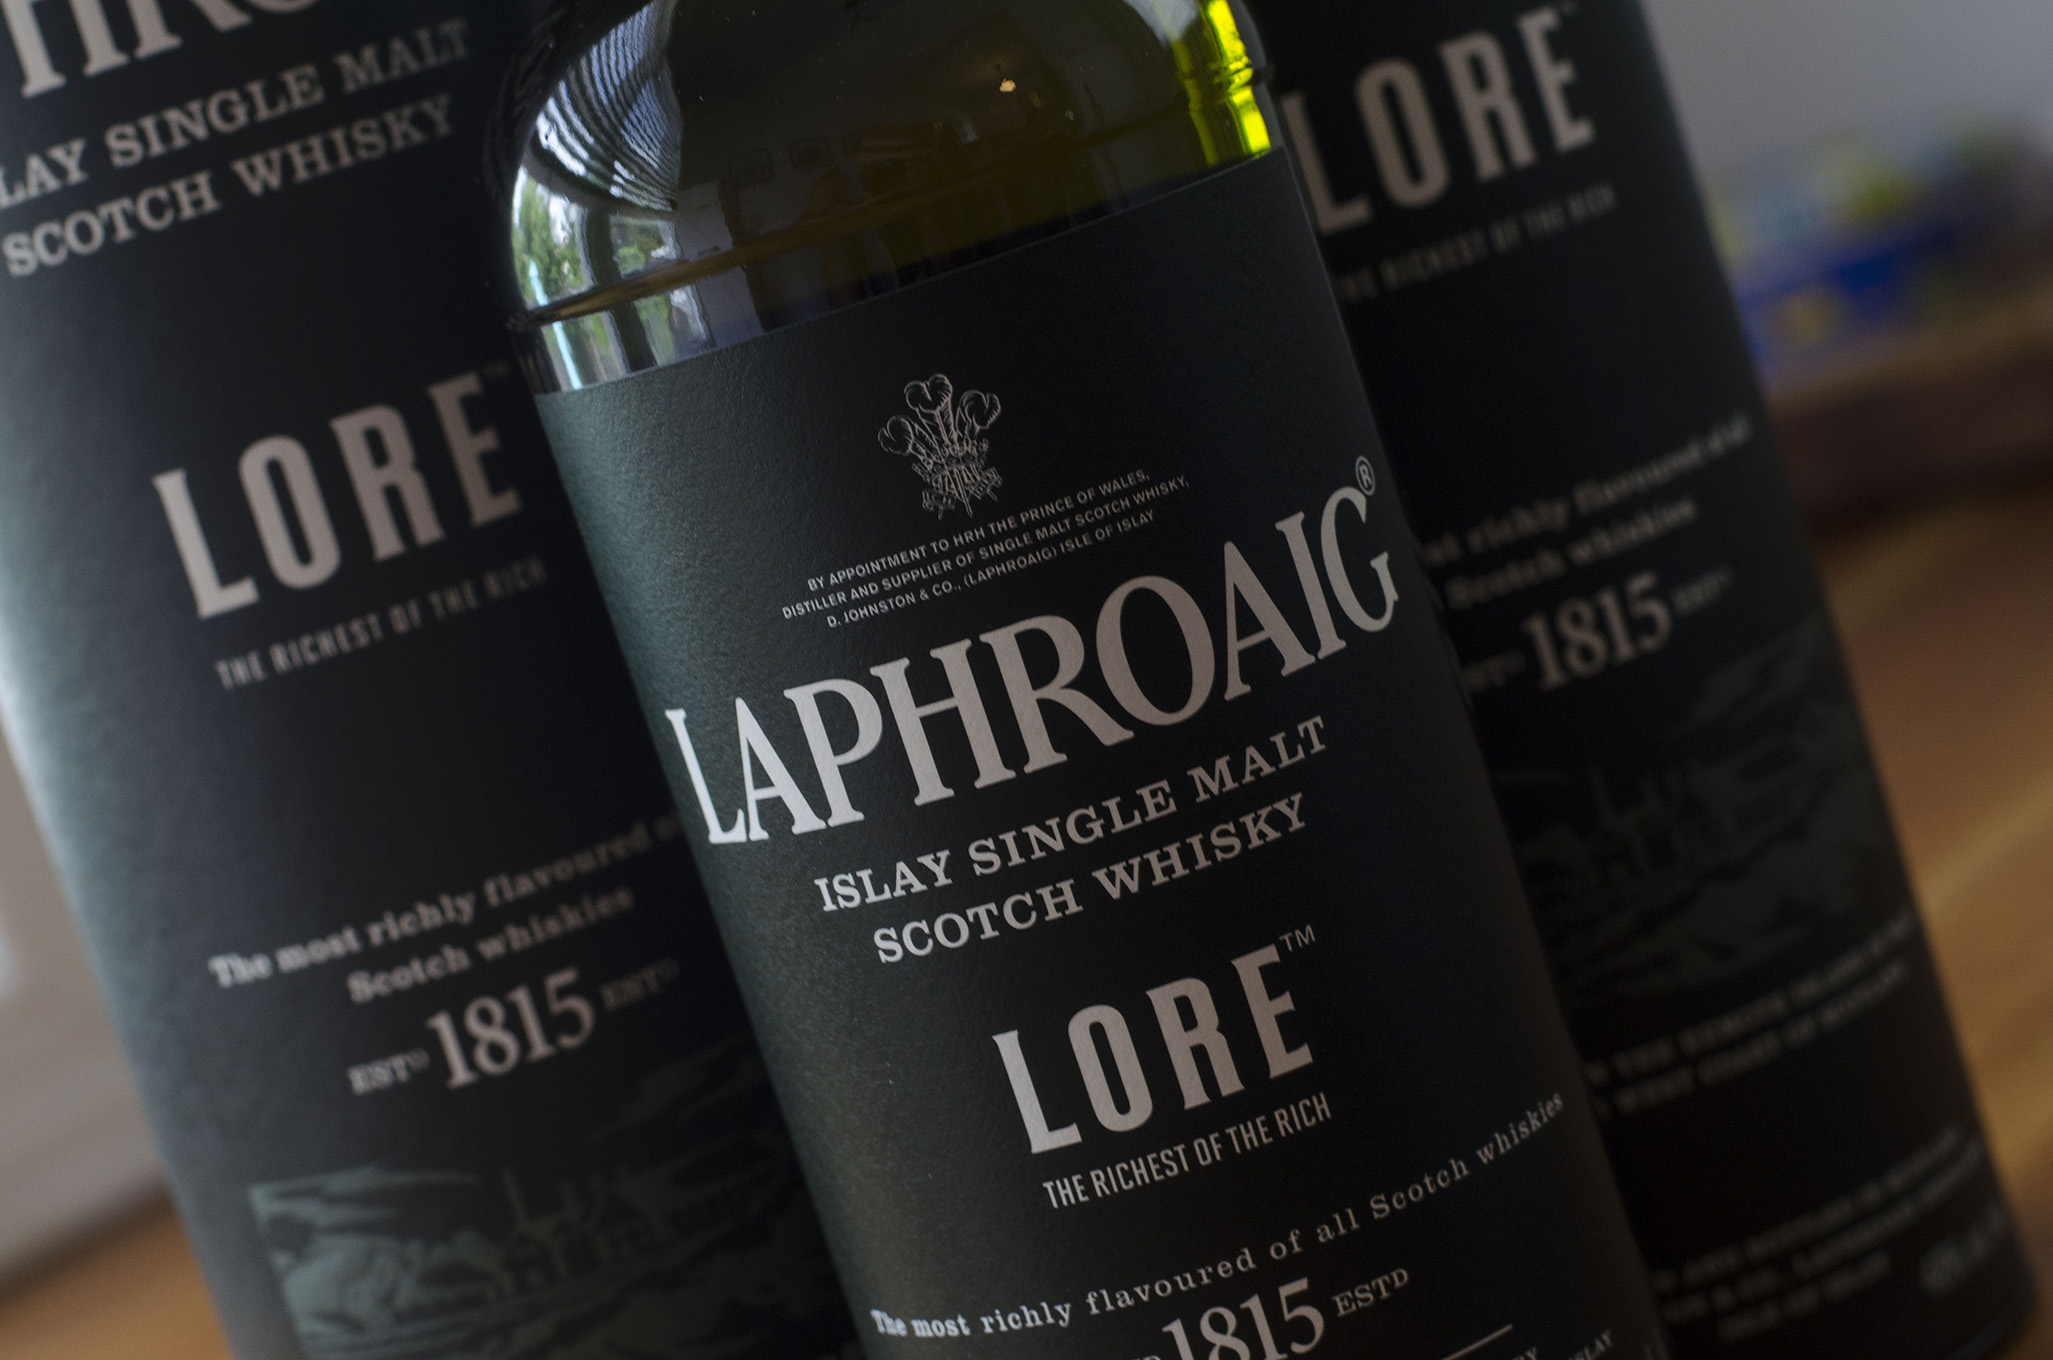 Laphroaig Lore is being served up at the 2019 Whiskytown Festival in Windsor, Ontario.